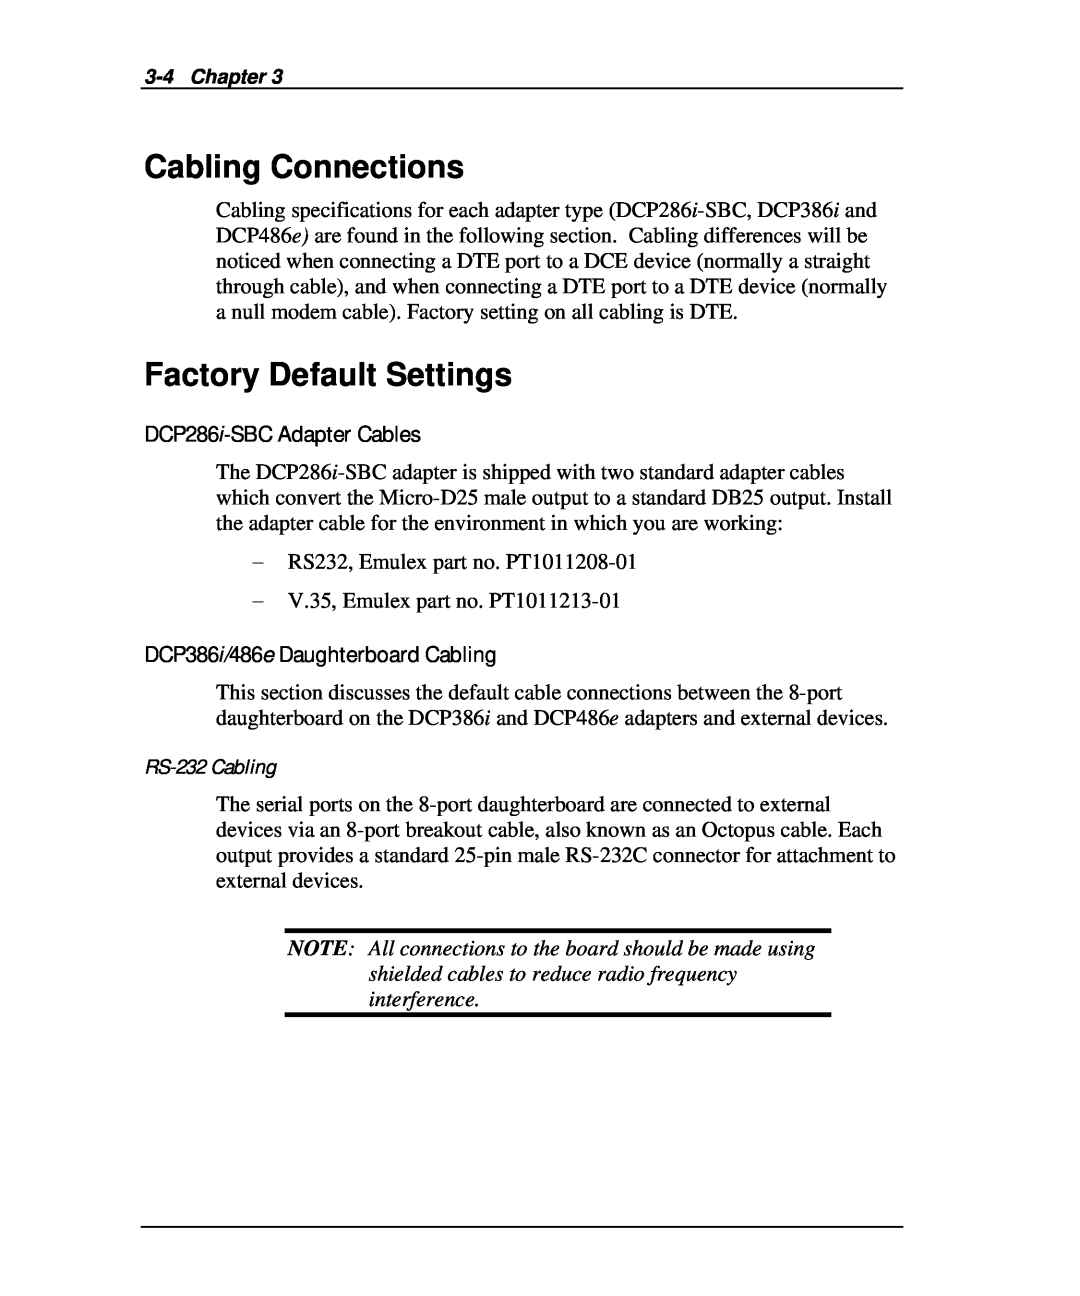 Emulex DCP_link manual Cabling Connections, DCP286i-SBC Adapter Cables, DCP386i/486e Daughterboard Cabling, RS-232 Cabling 